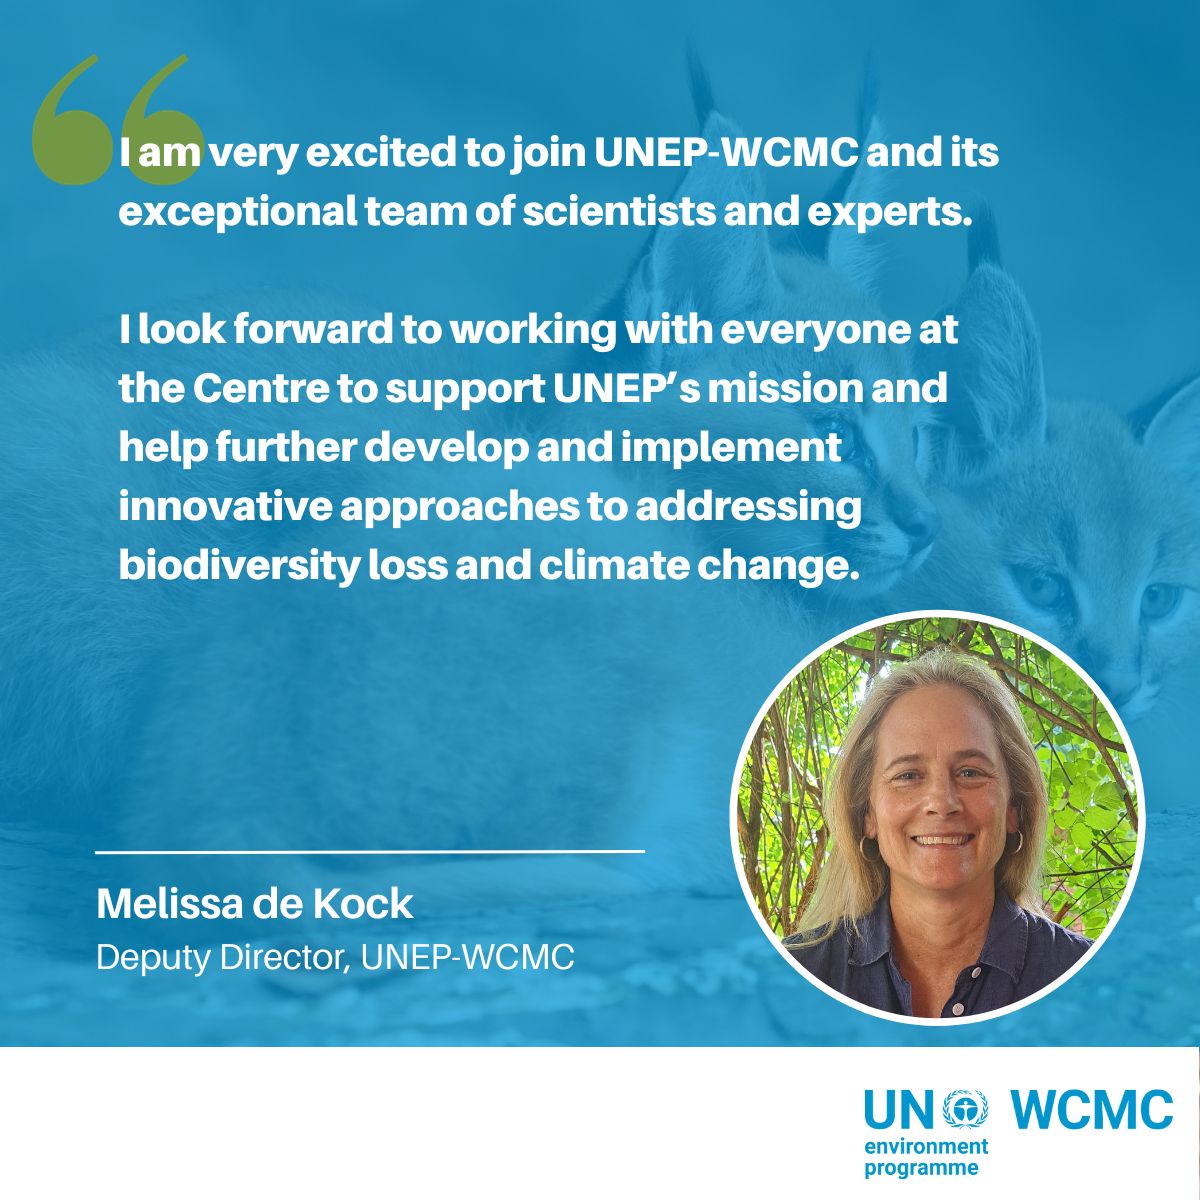 📢UNEP-WCMC is delighted to announce the appointment of our new Deputy Director Melissa de Kock. Melissa joins us today from @UNEP, where she was Head of the Biodiversity, People and Landscapes Unit. We look forward to working with her 🔗 tinyurl.com/mr2p5rdn